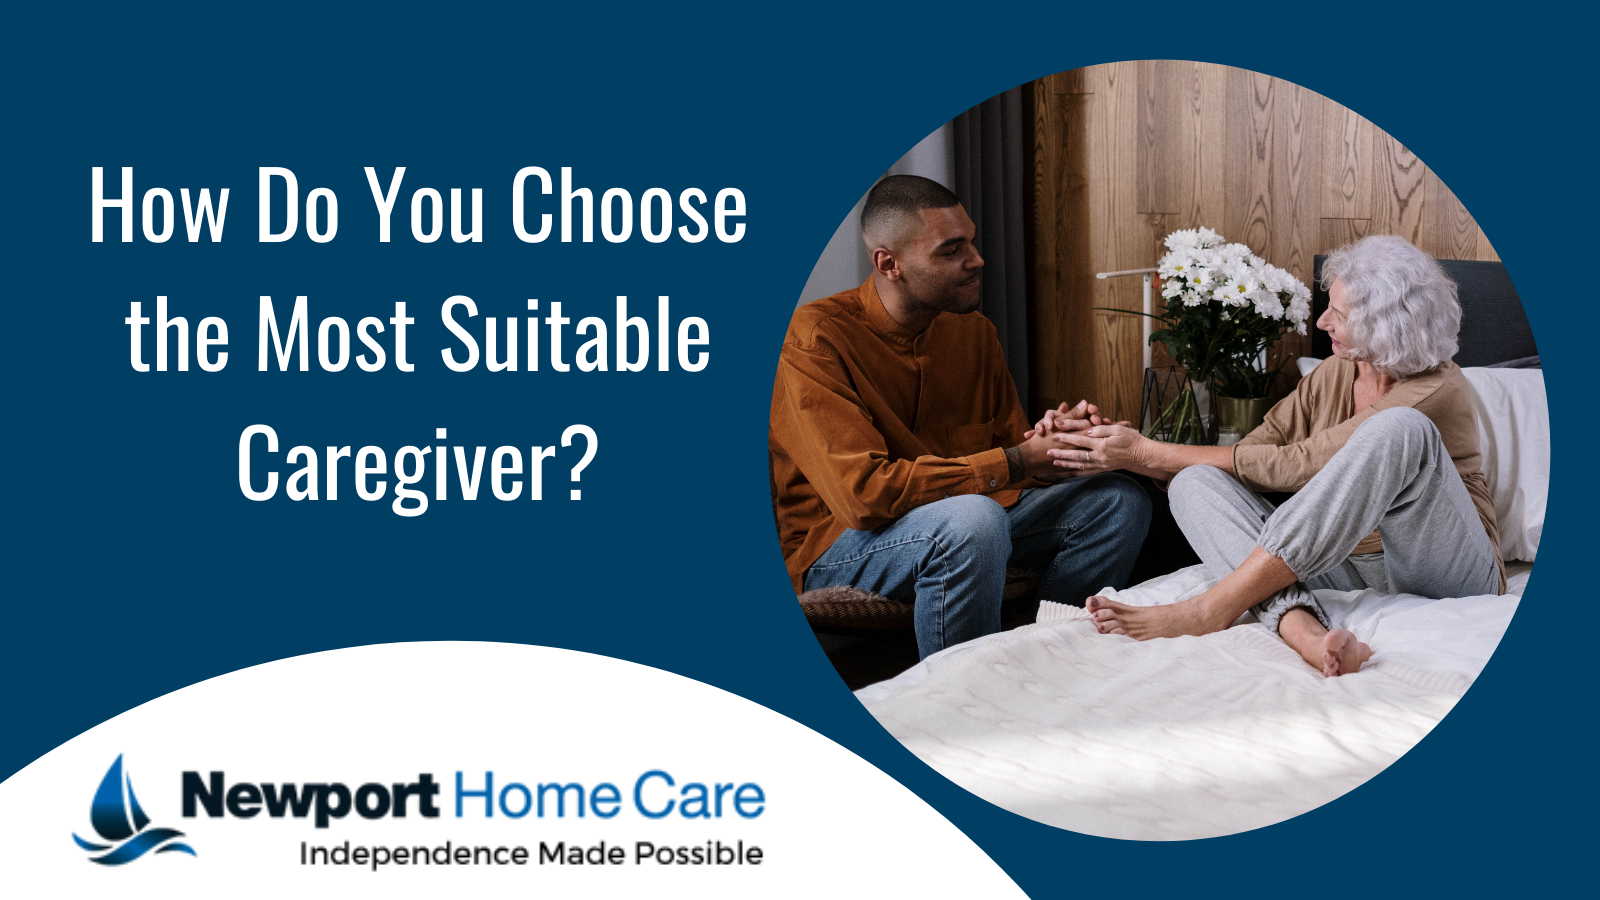 How Do You Choose the Most Suitable Caregiver?